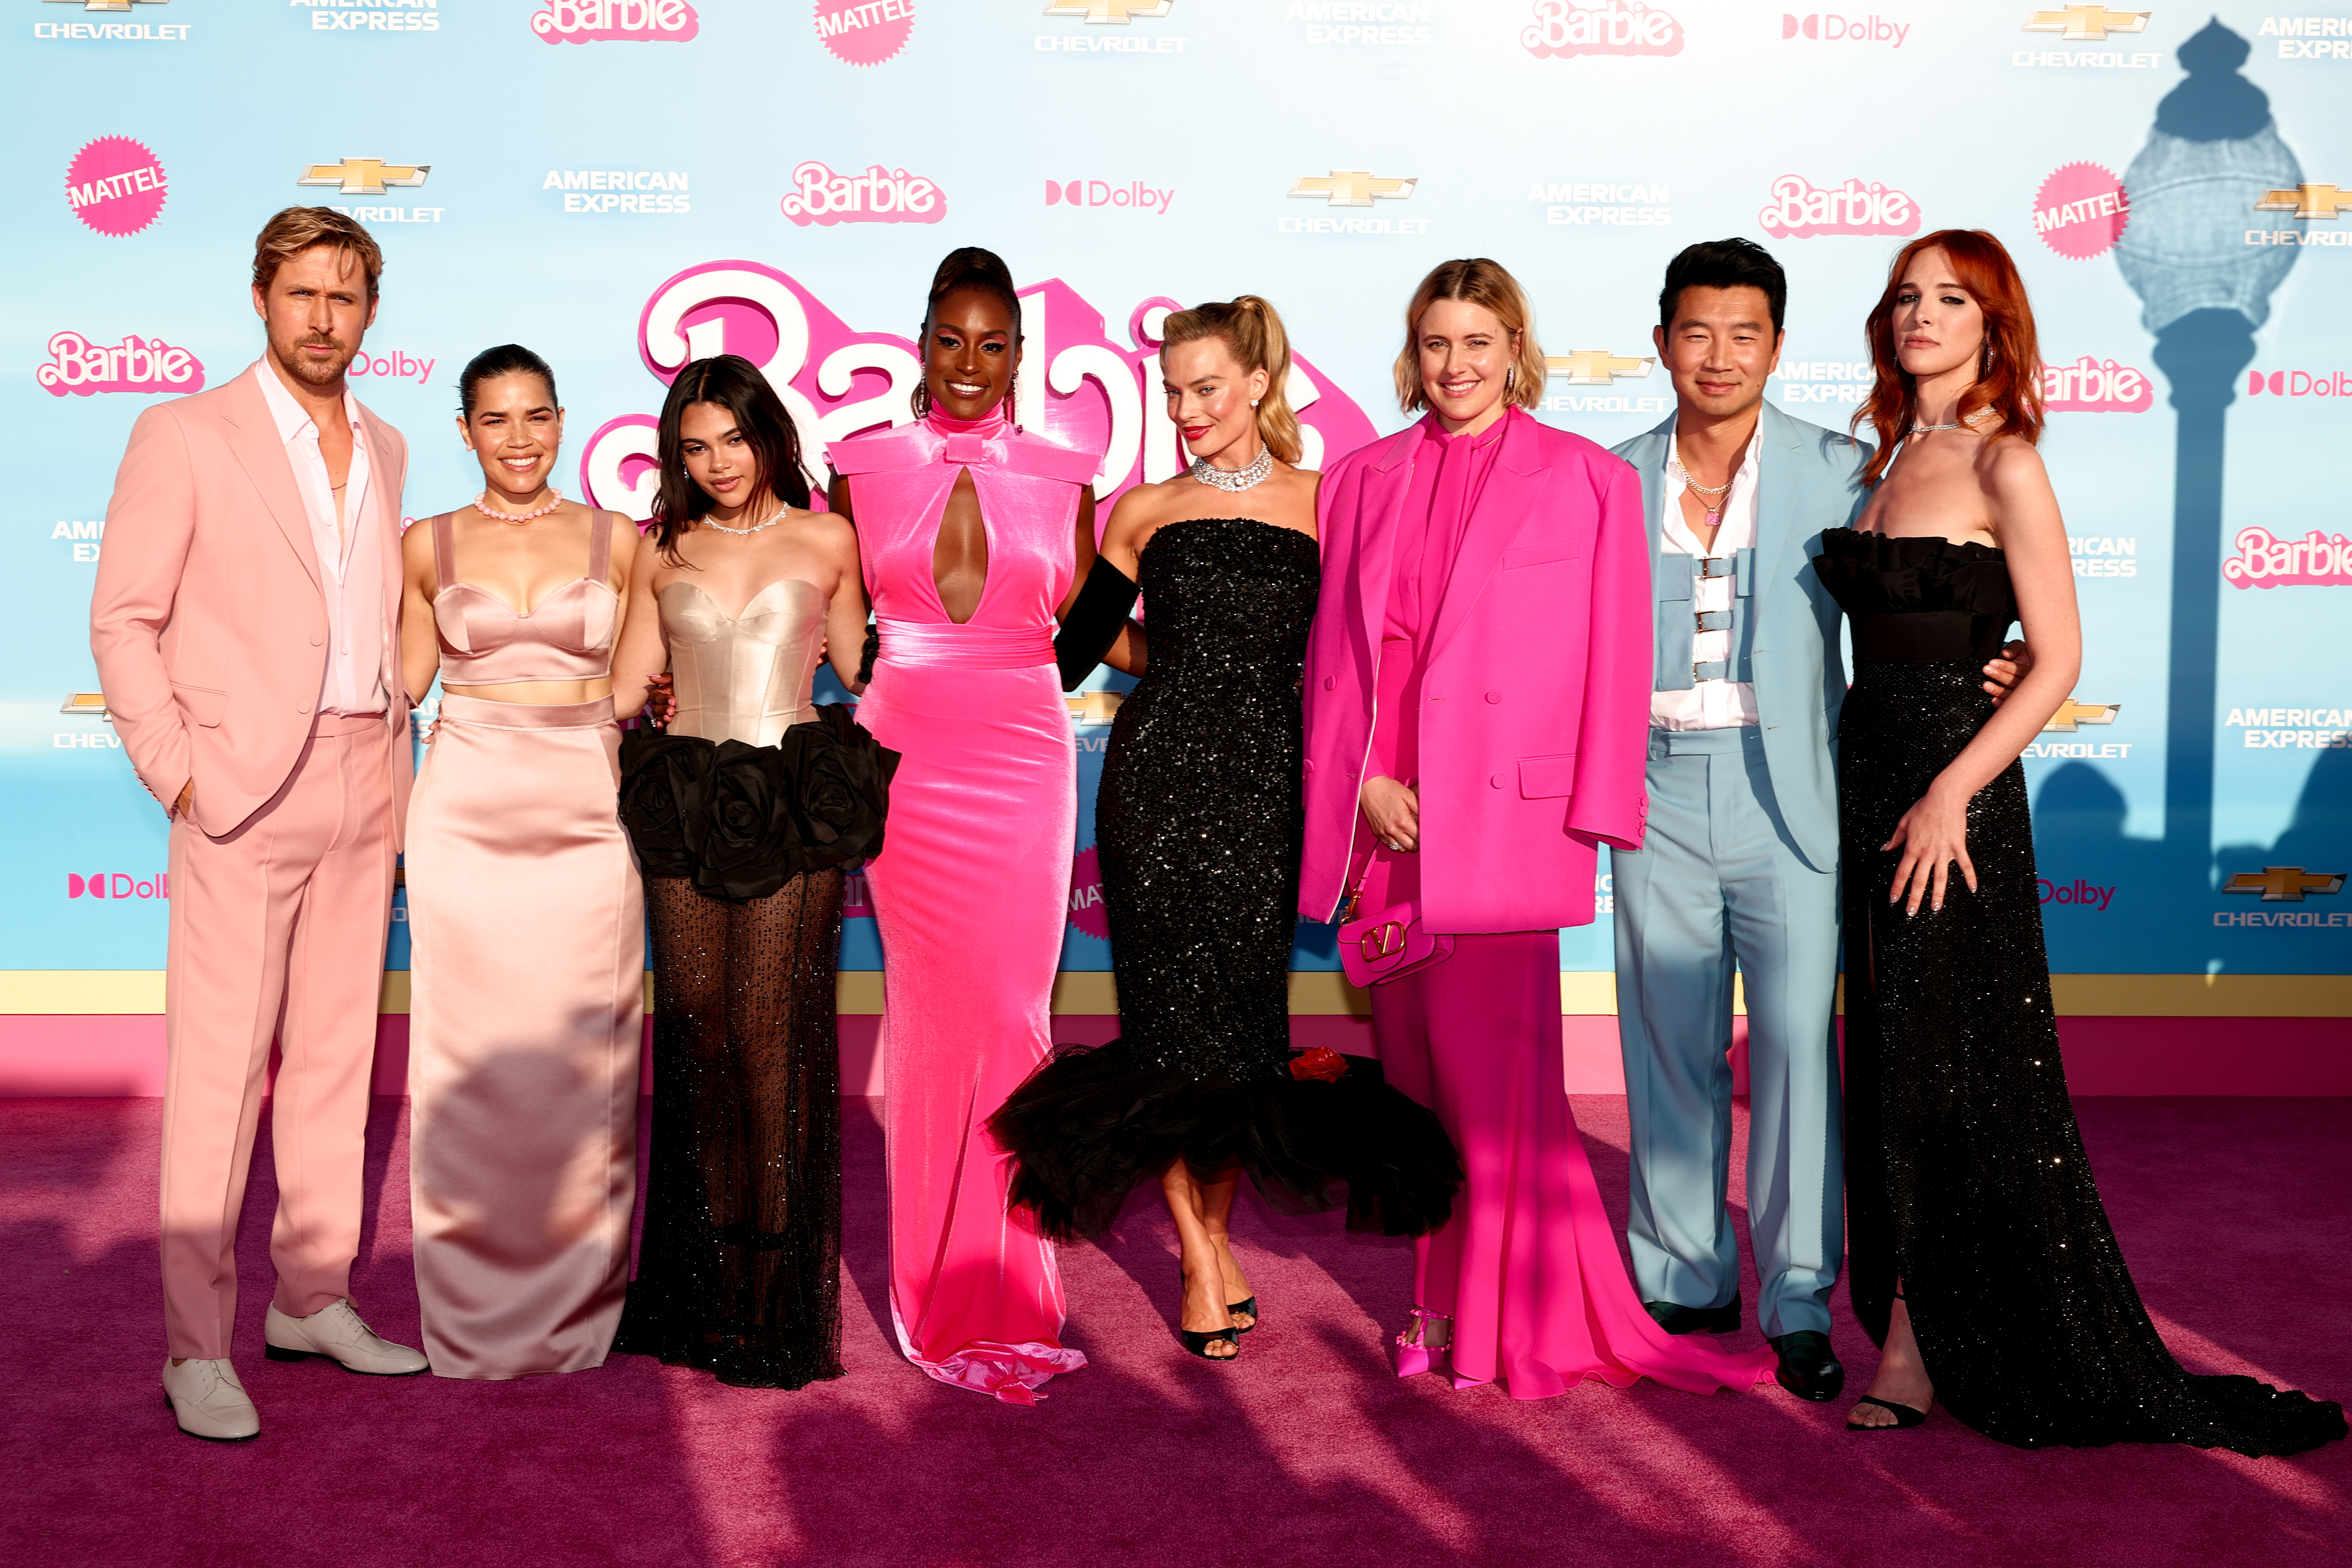 "Barbie" cast at the premiere of "Barbie" held at Shrine Auditorium and Expo Hall on July 9, 2023, in Los Angeles, California. | Source: Getty Images